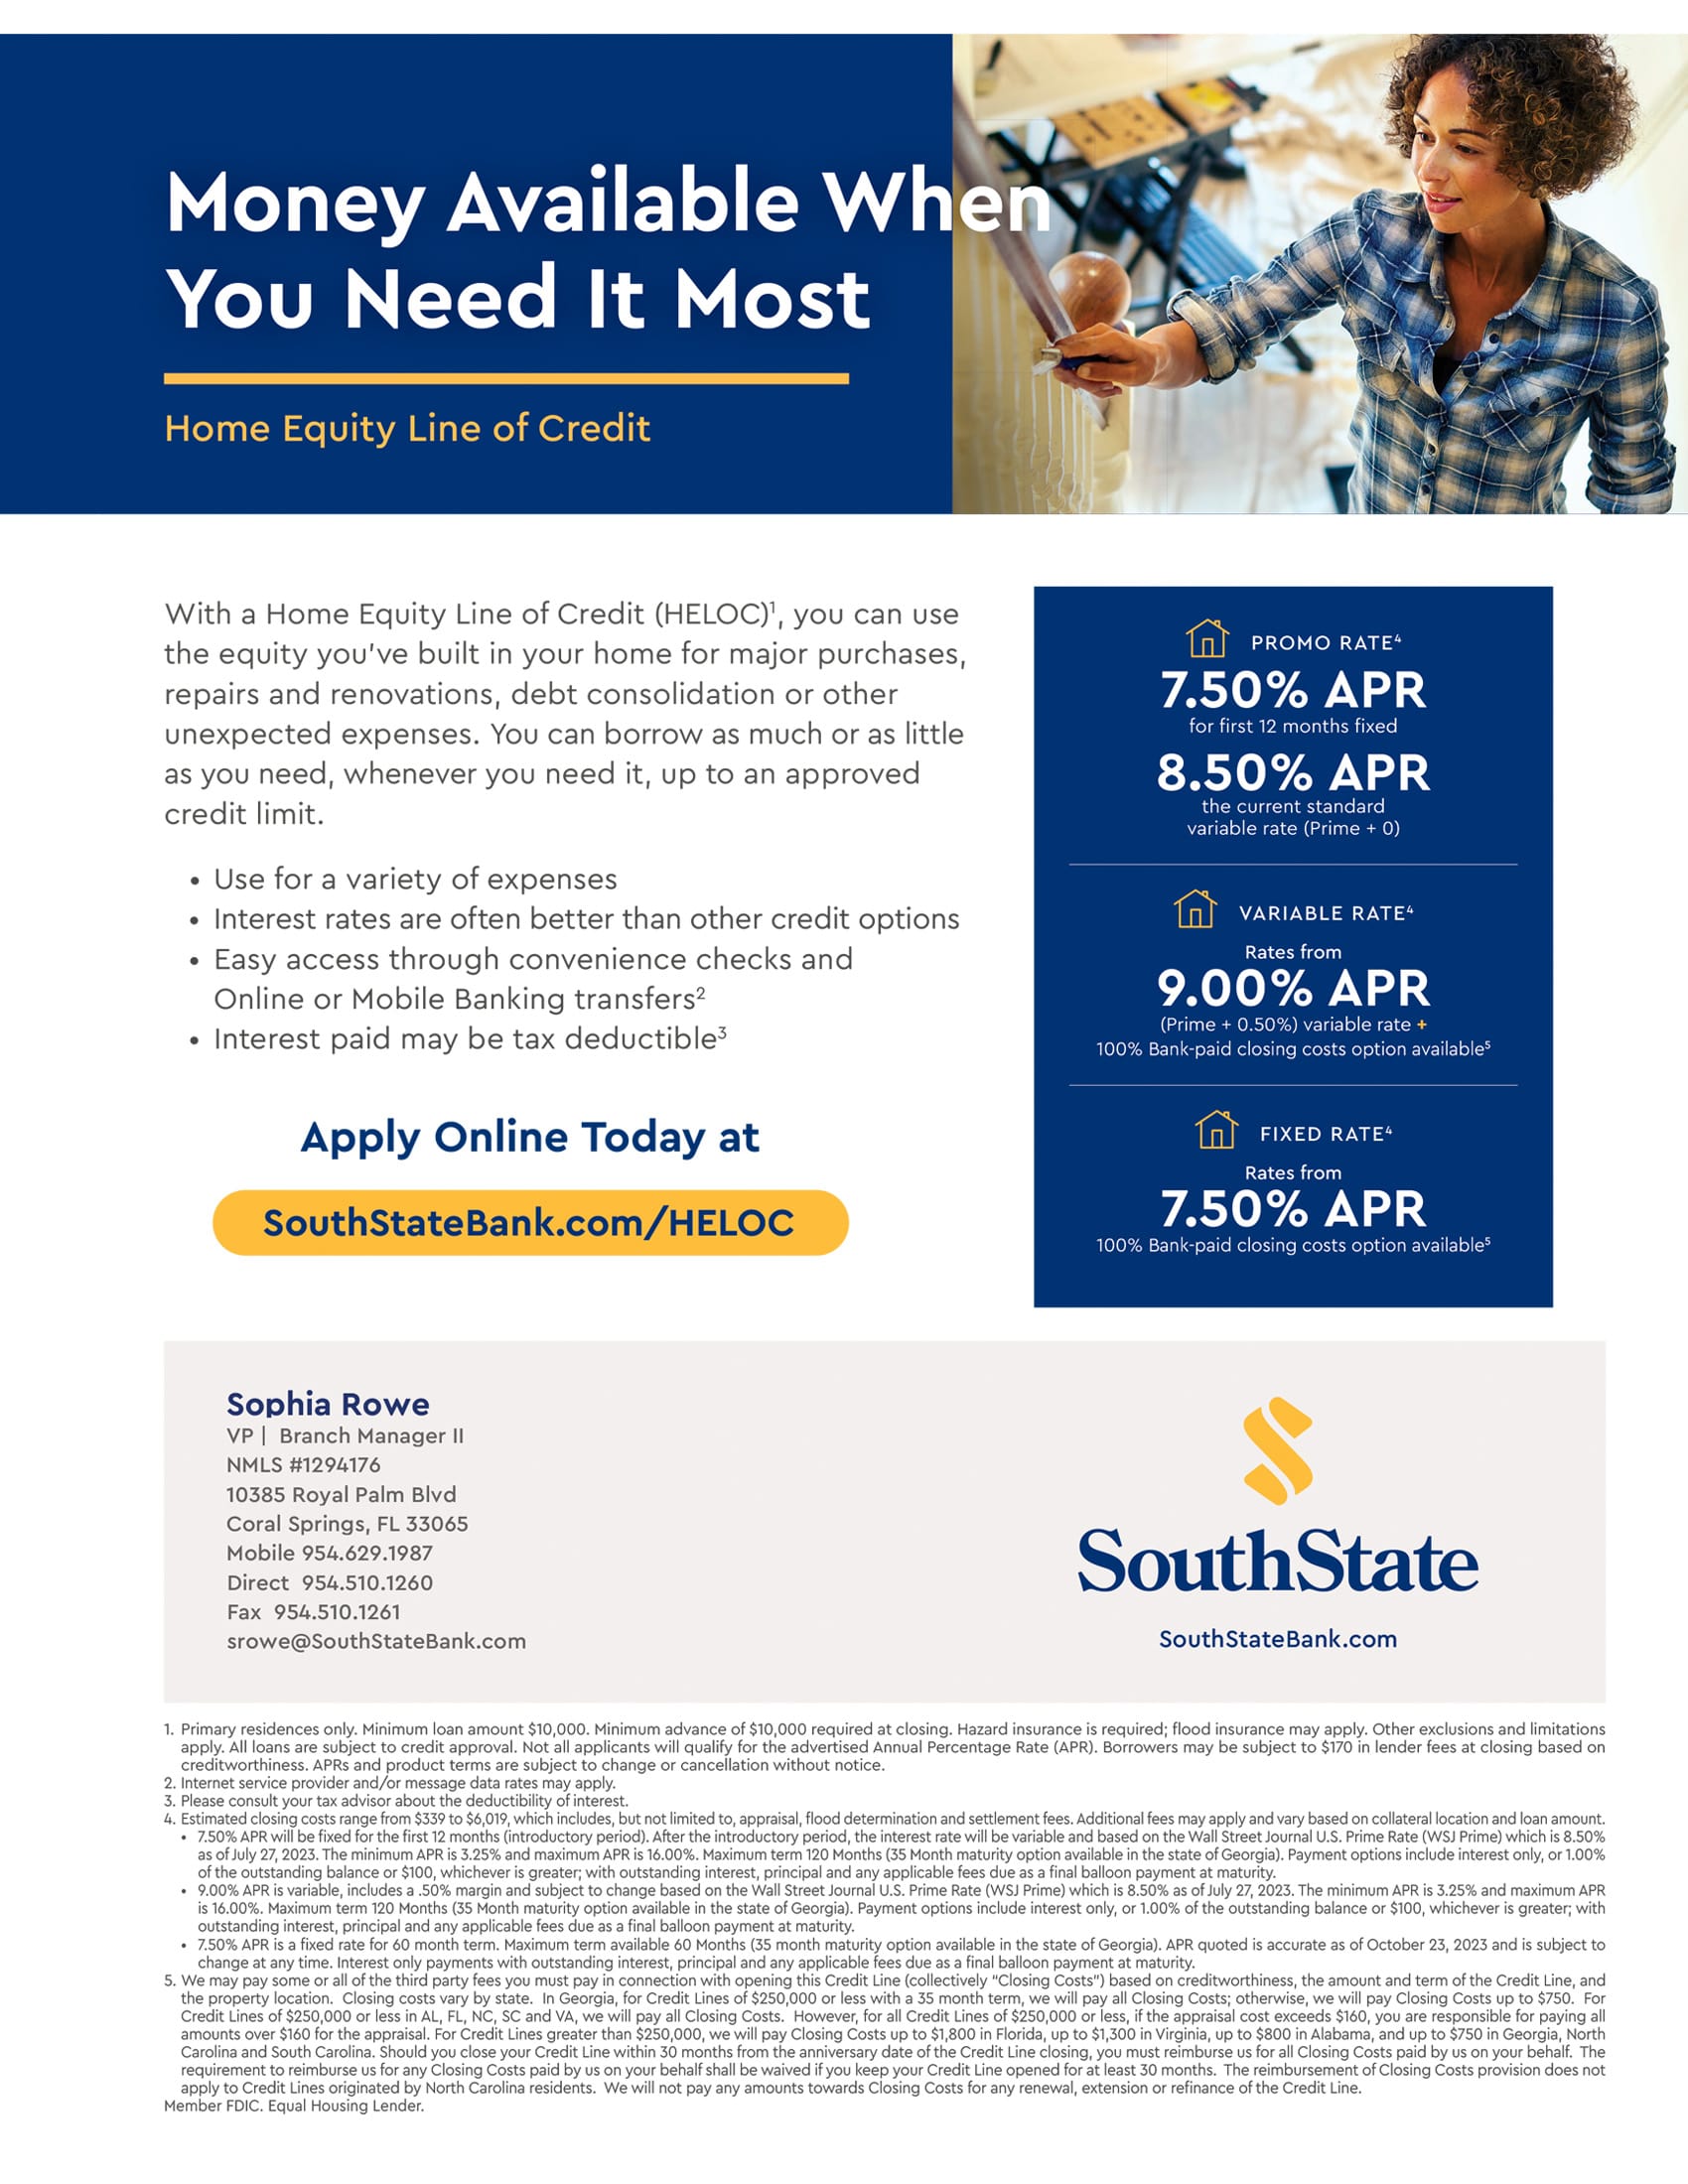 South State Bank 